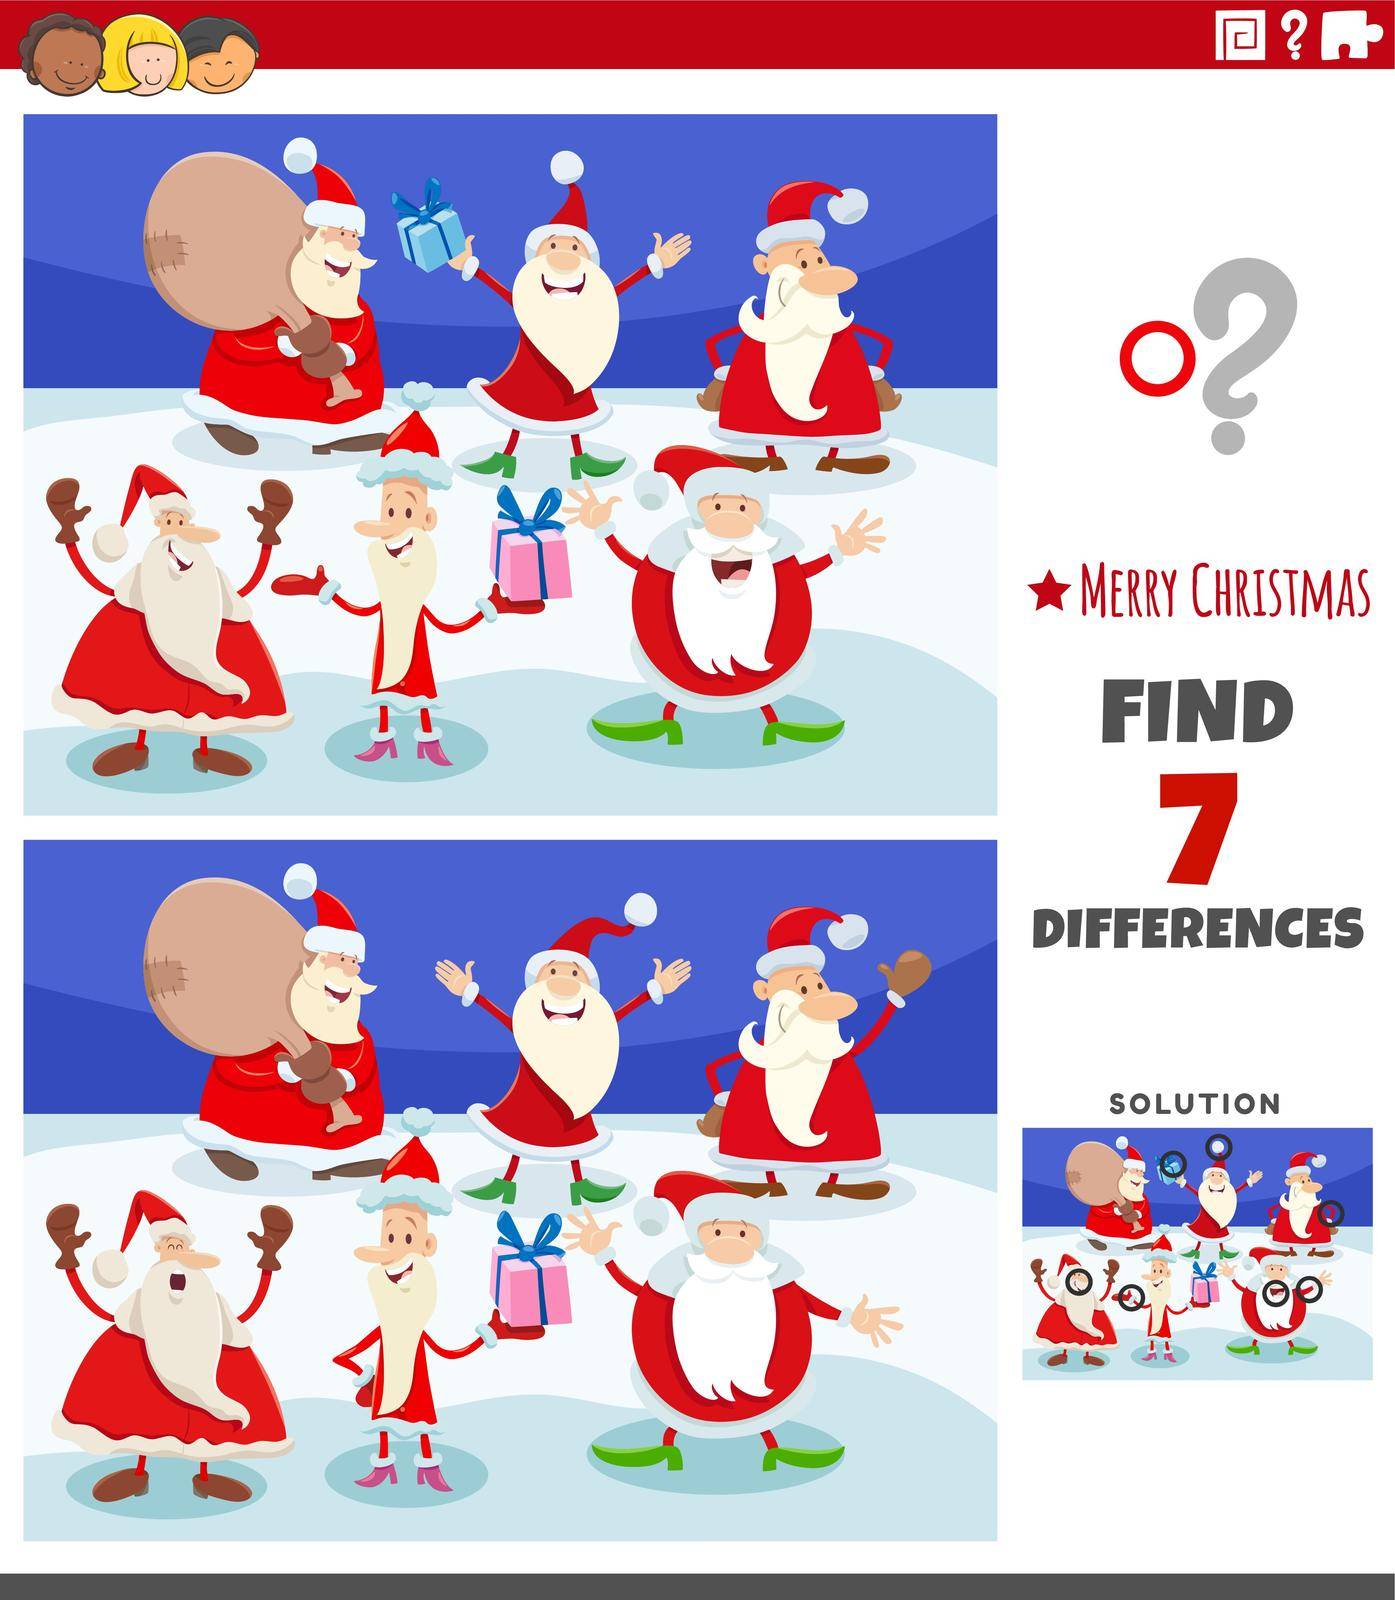 Cartoon illustration of finding differences between pictures educational task for children with Santa Claus characters on Christmas time